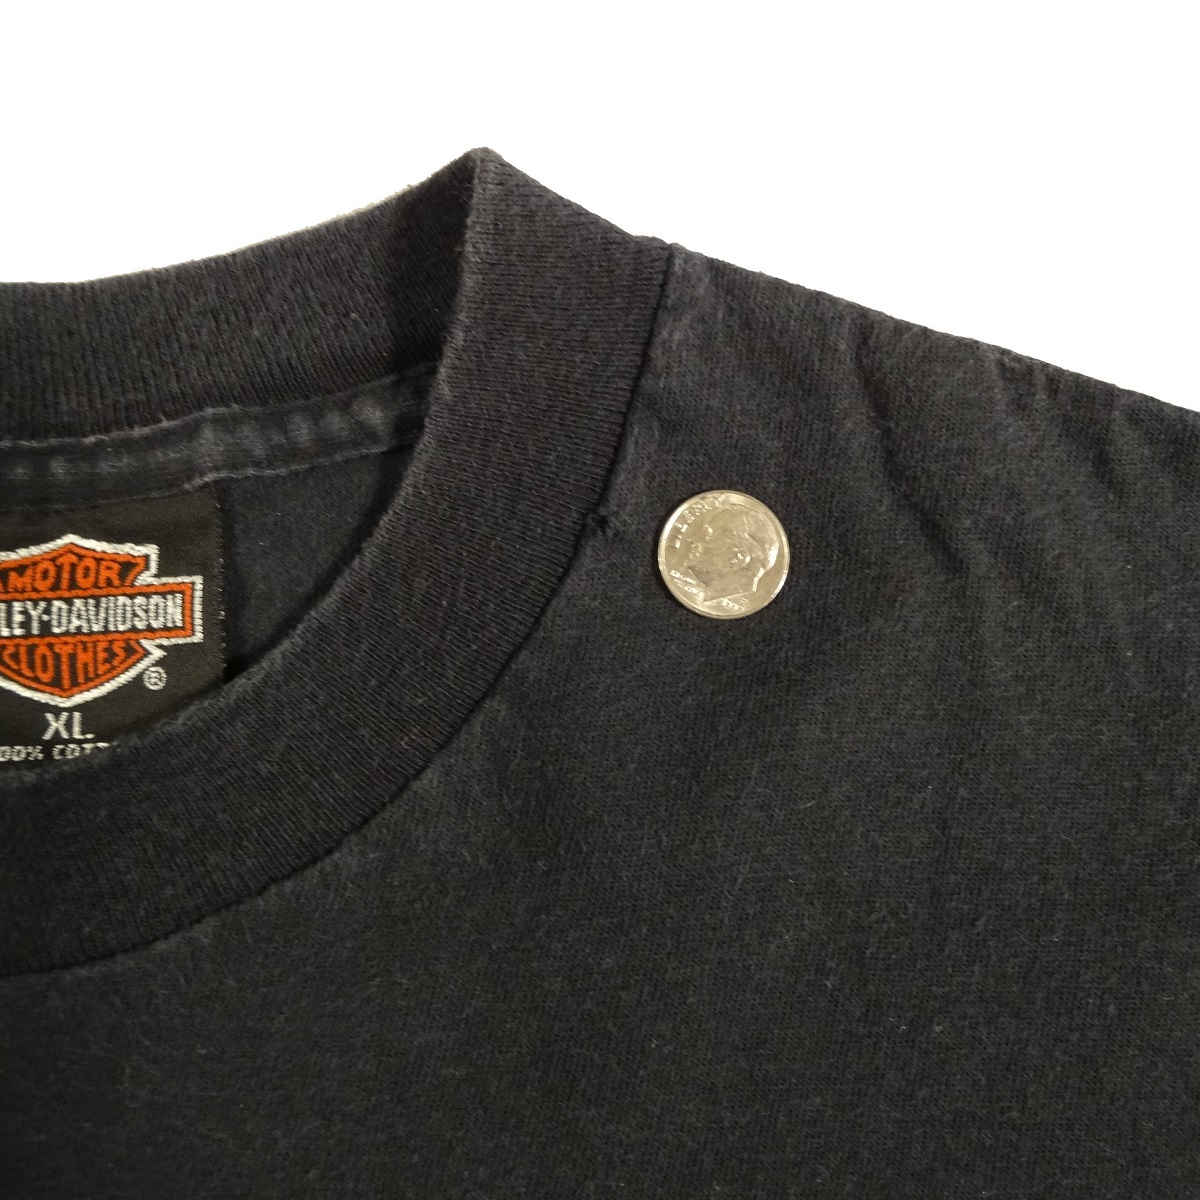 XL Vintage Harley Davidson Knoxville Tennessee T-Shirt